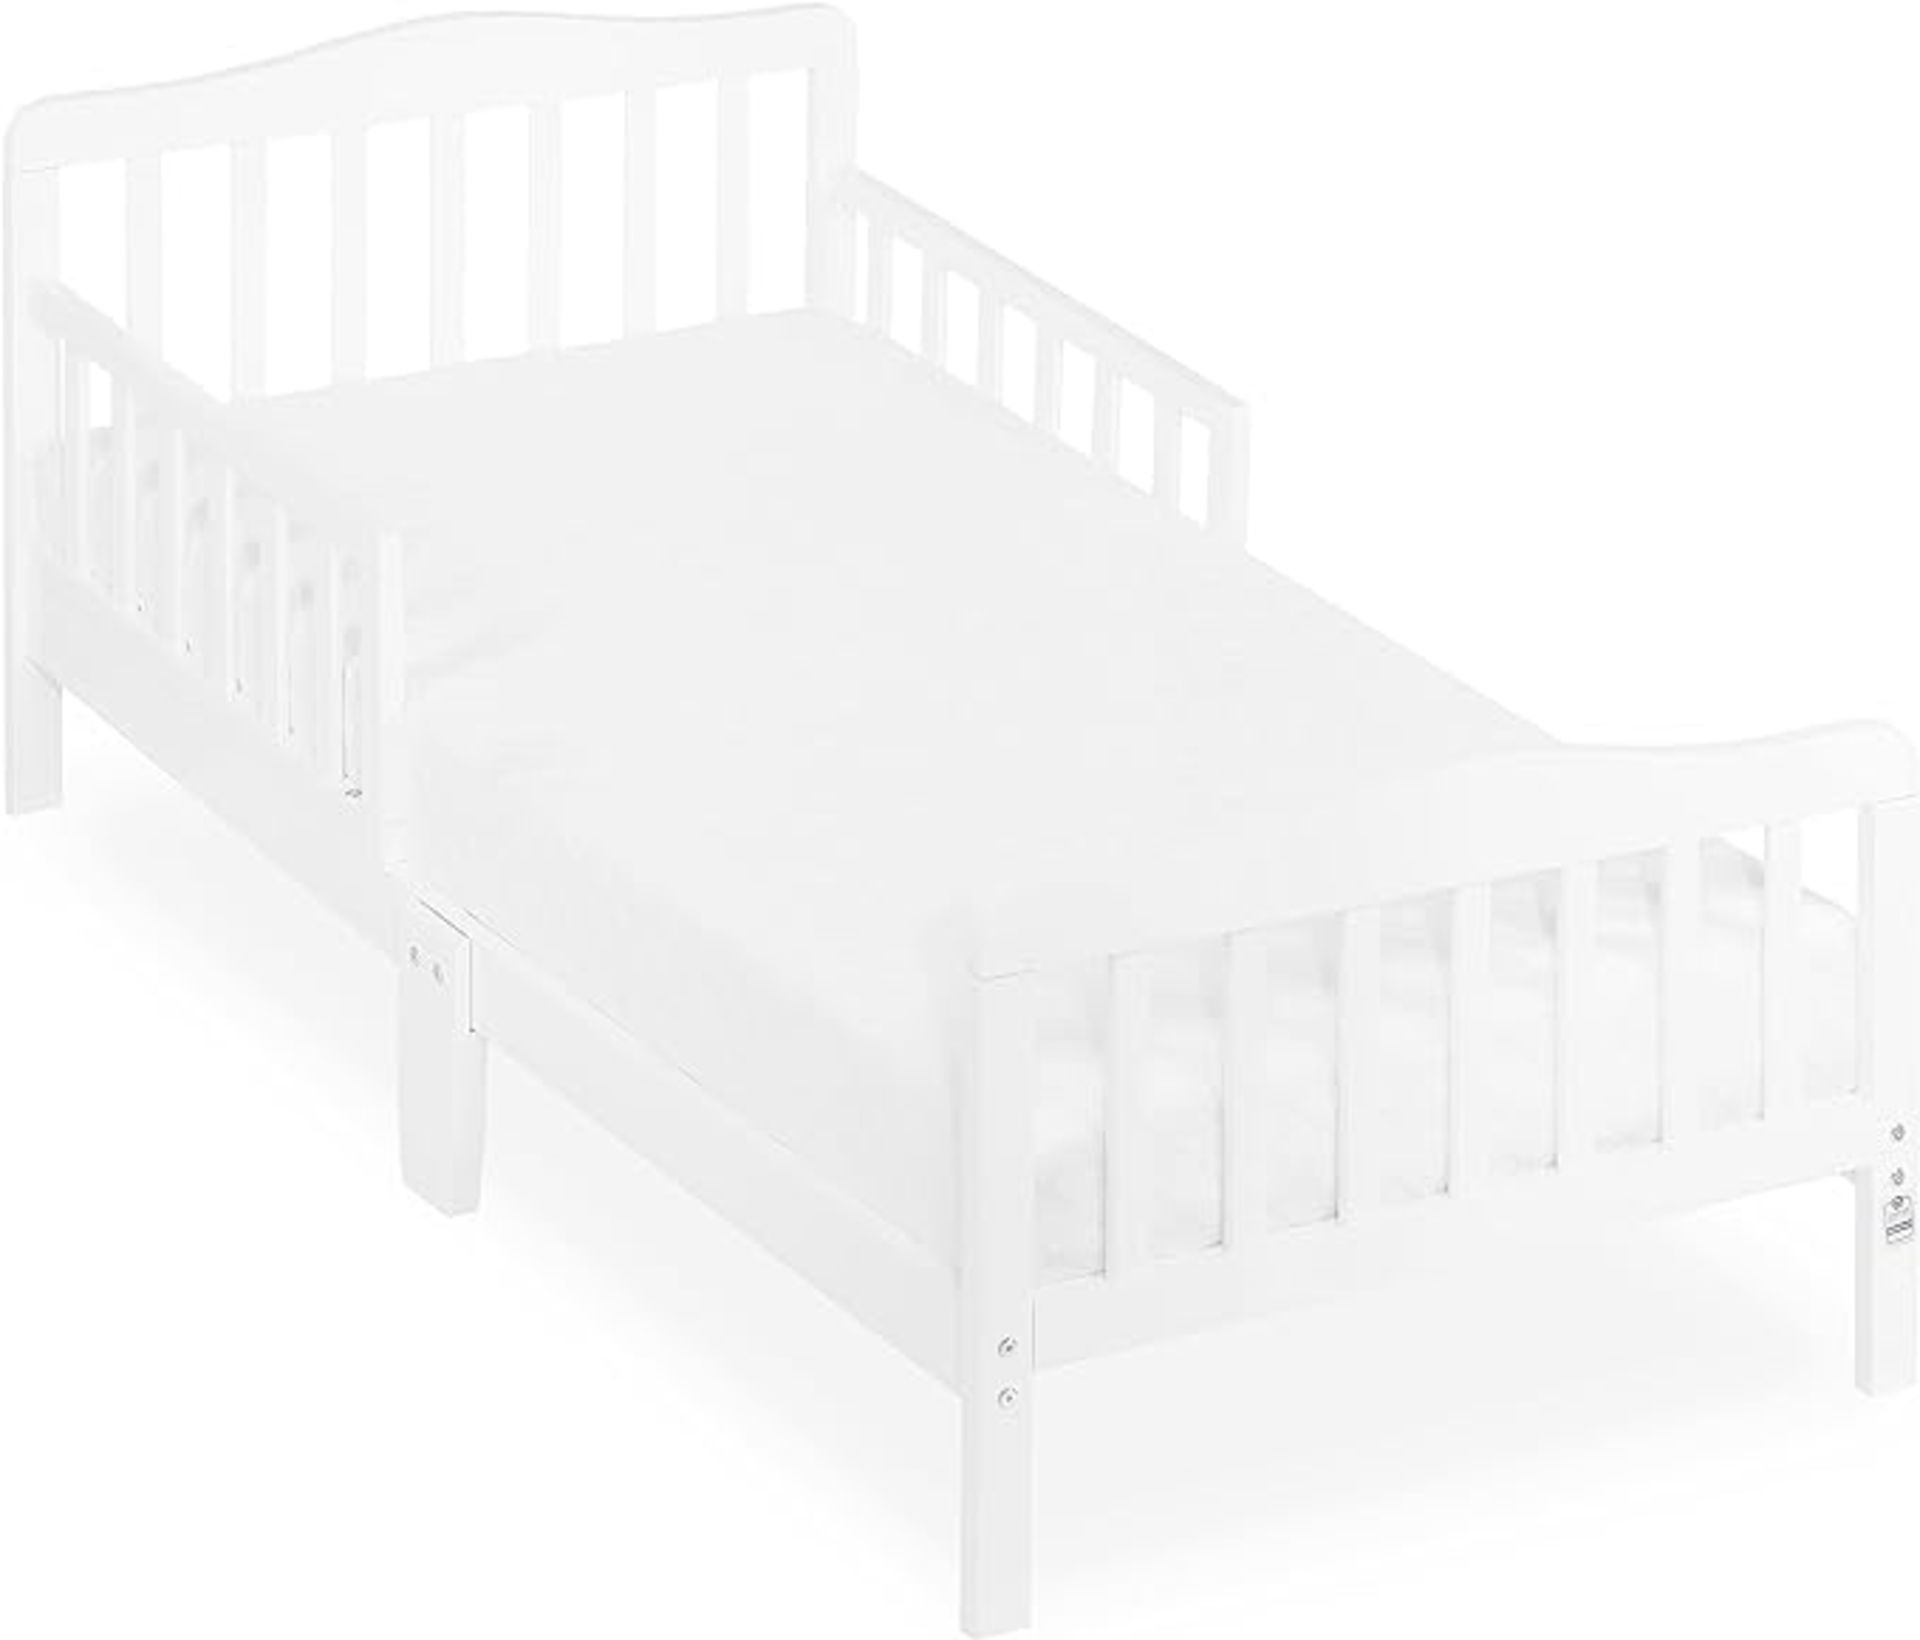 10 X Brand New Dream on Me Classic Toddler BedS. Product dimensionS - 144.8L x 71.1W x 76.2H CM - Image 4 of 4